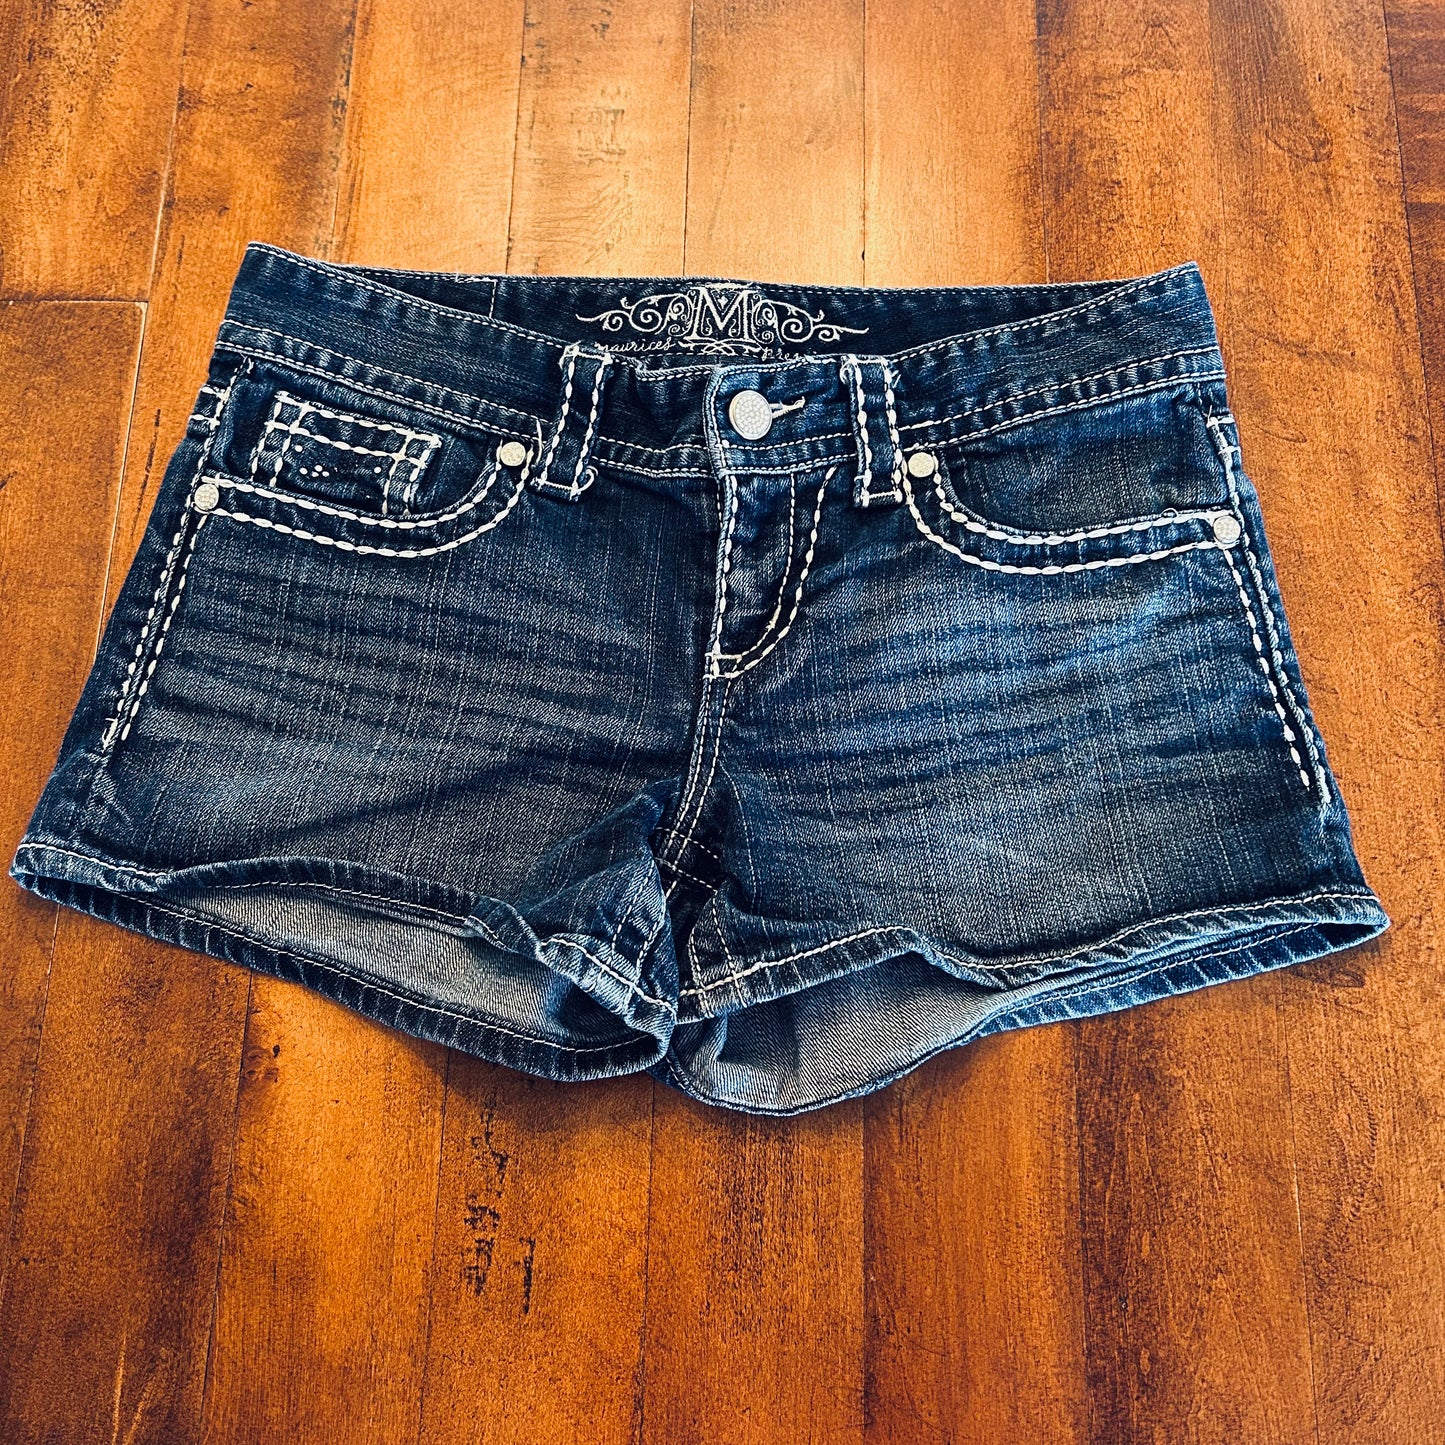 Maurices Jean Shorts Size 9/10